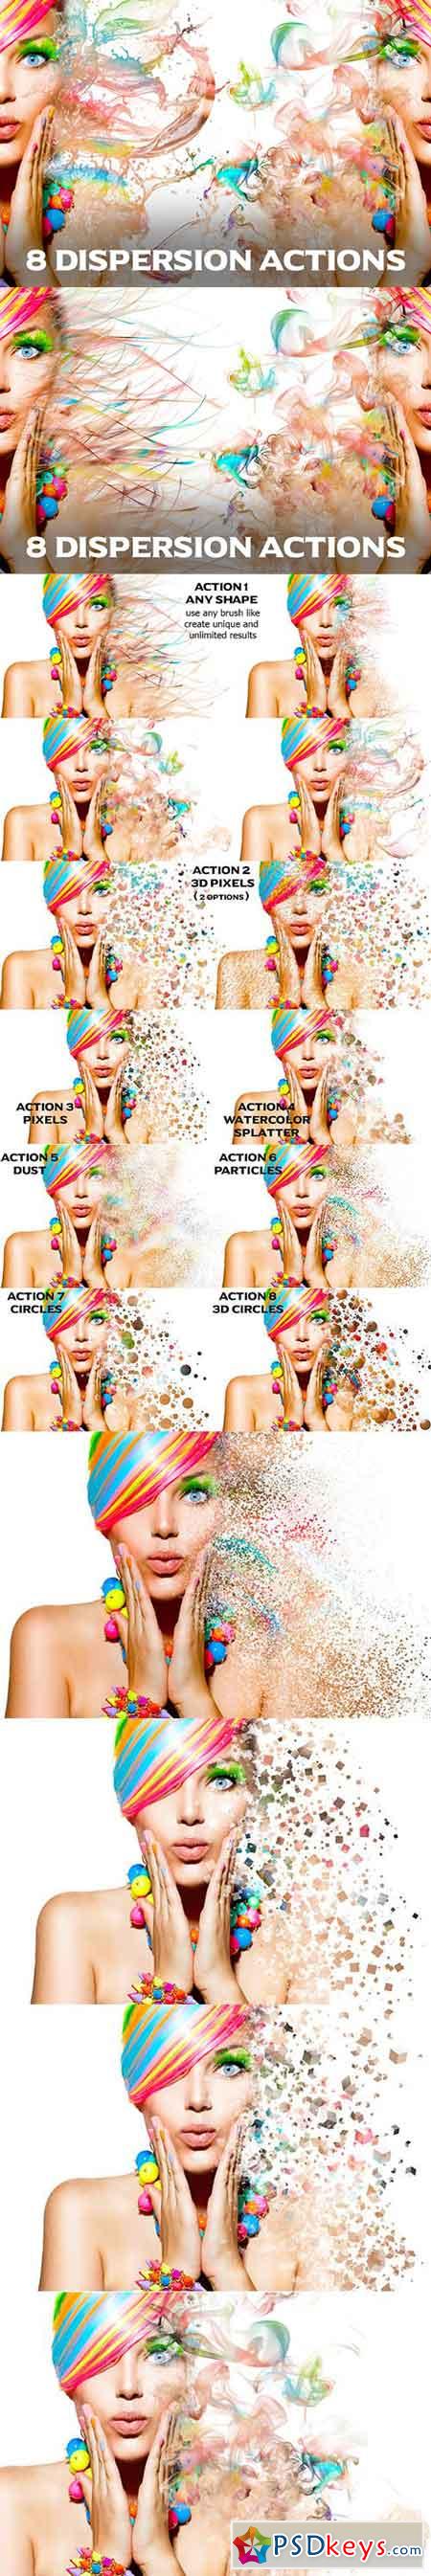 8 Dispersion Actions for Photoshop 2816287